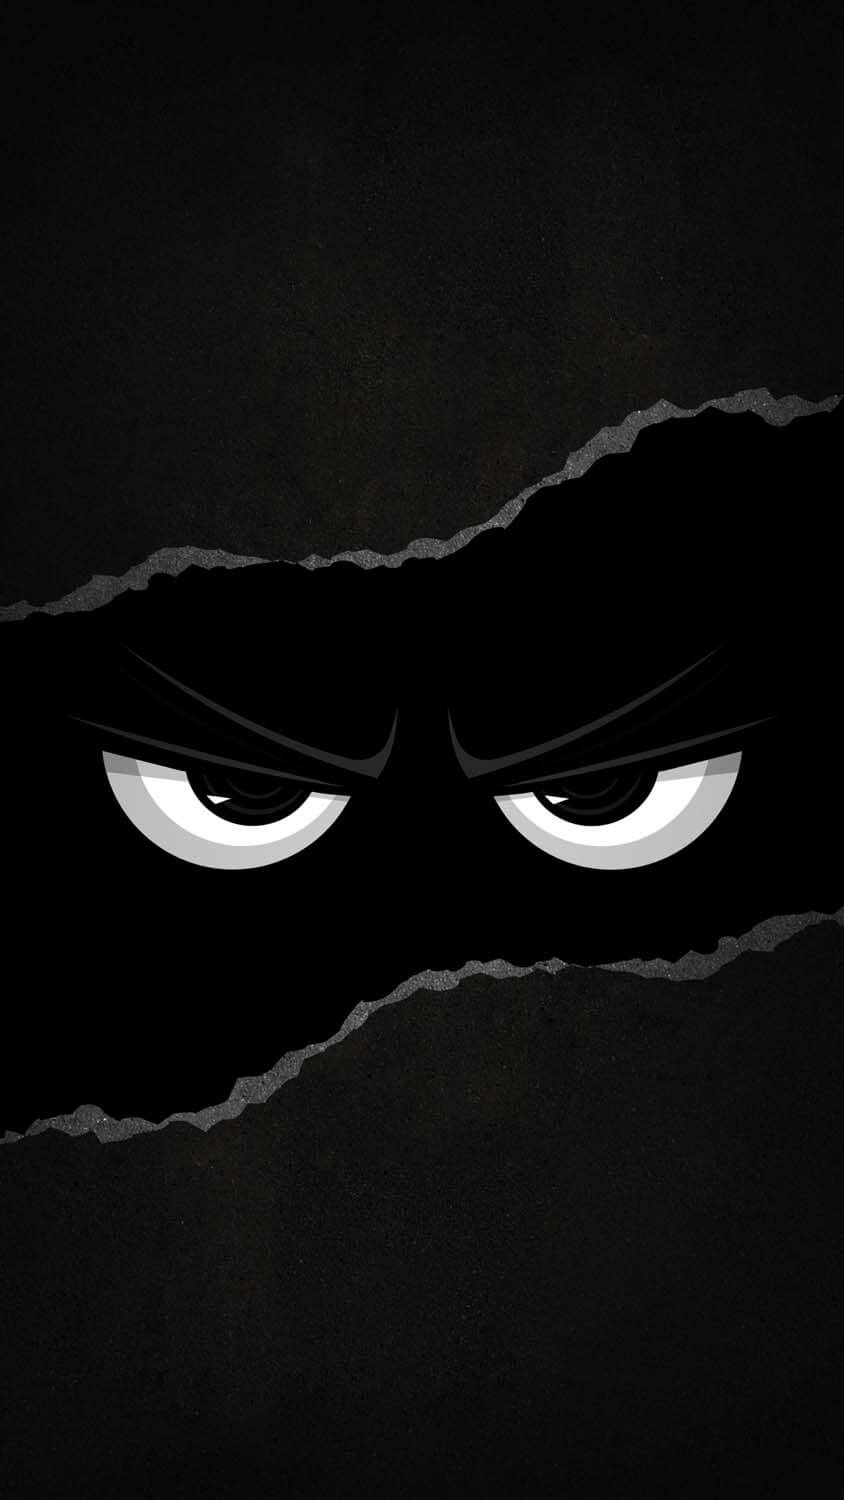 Angry Eyes IPhone Wallpaper HD  IPhone Wallpapers